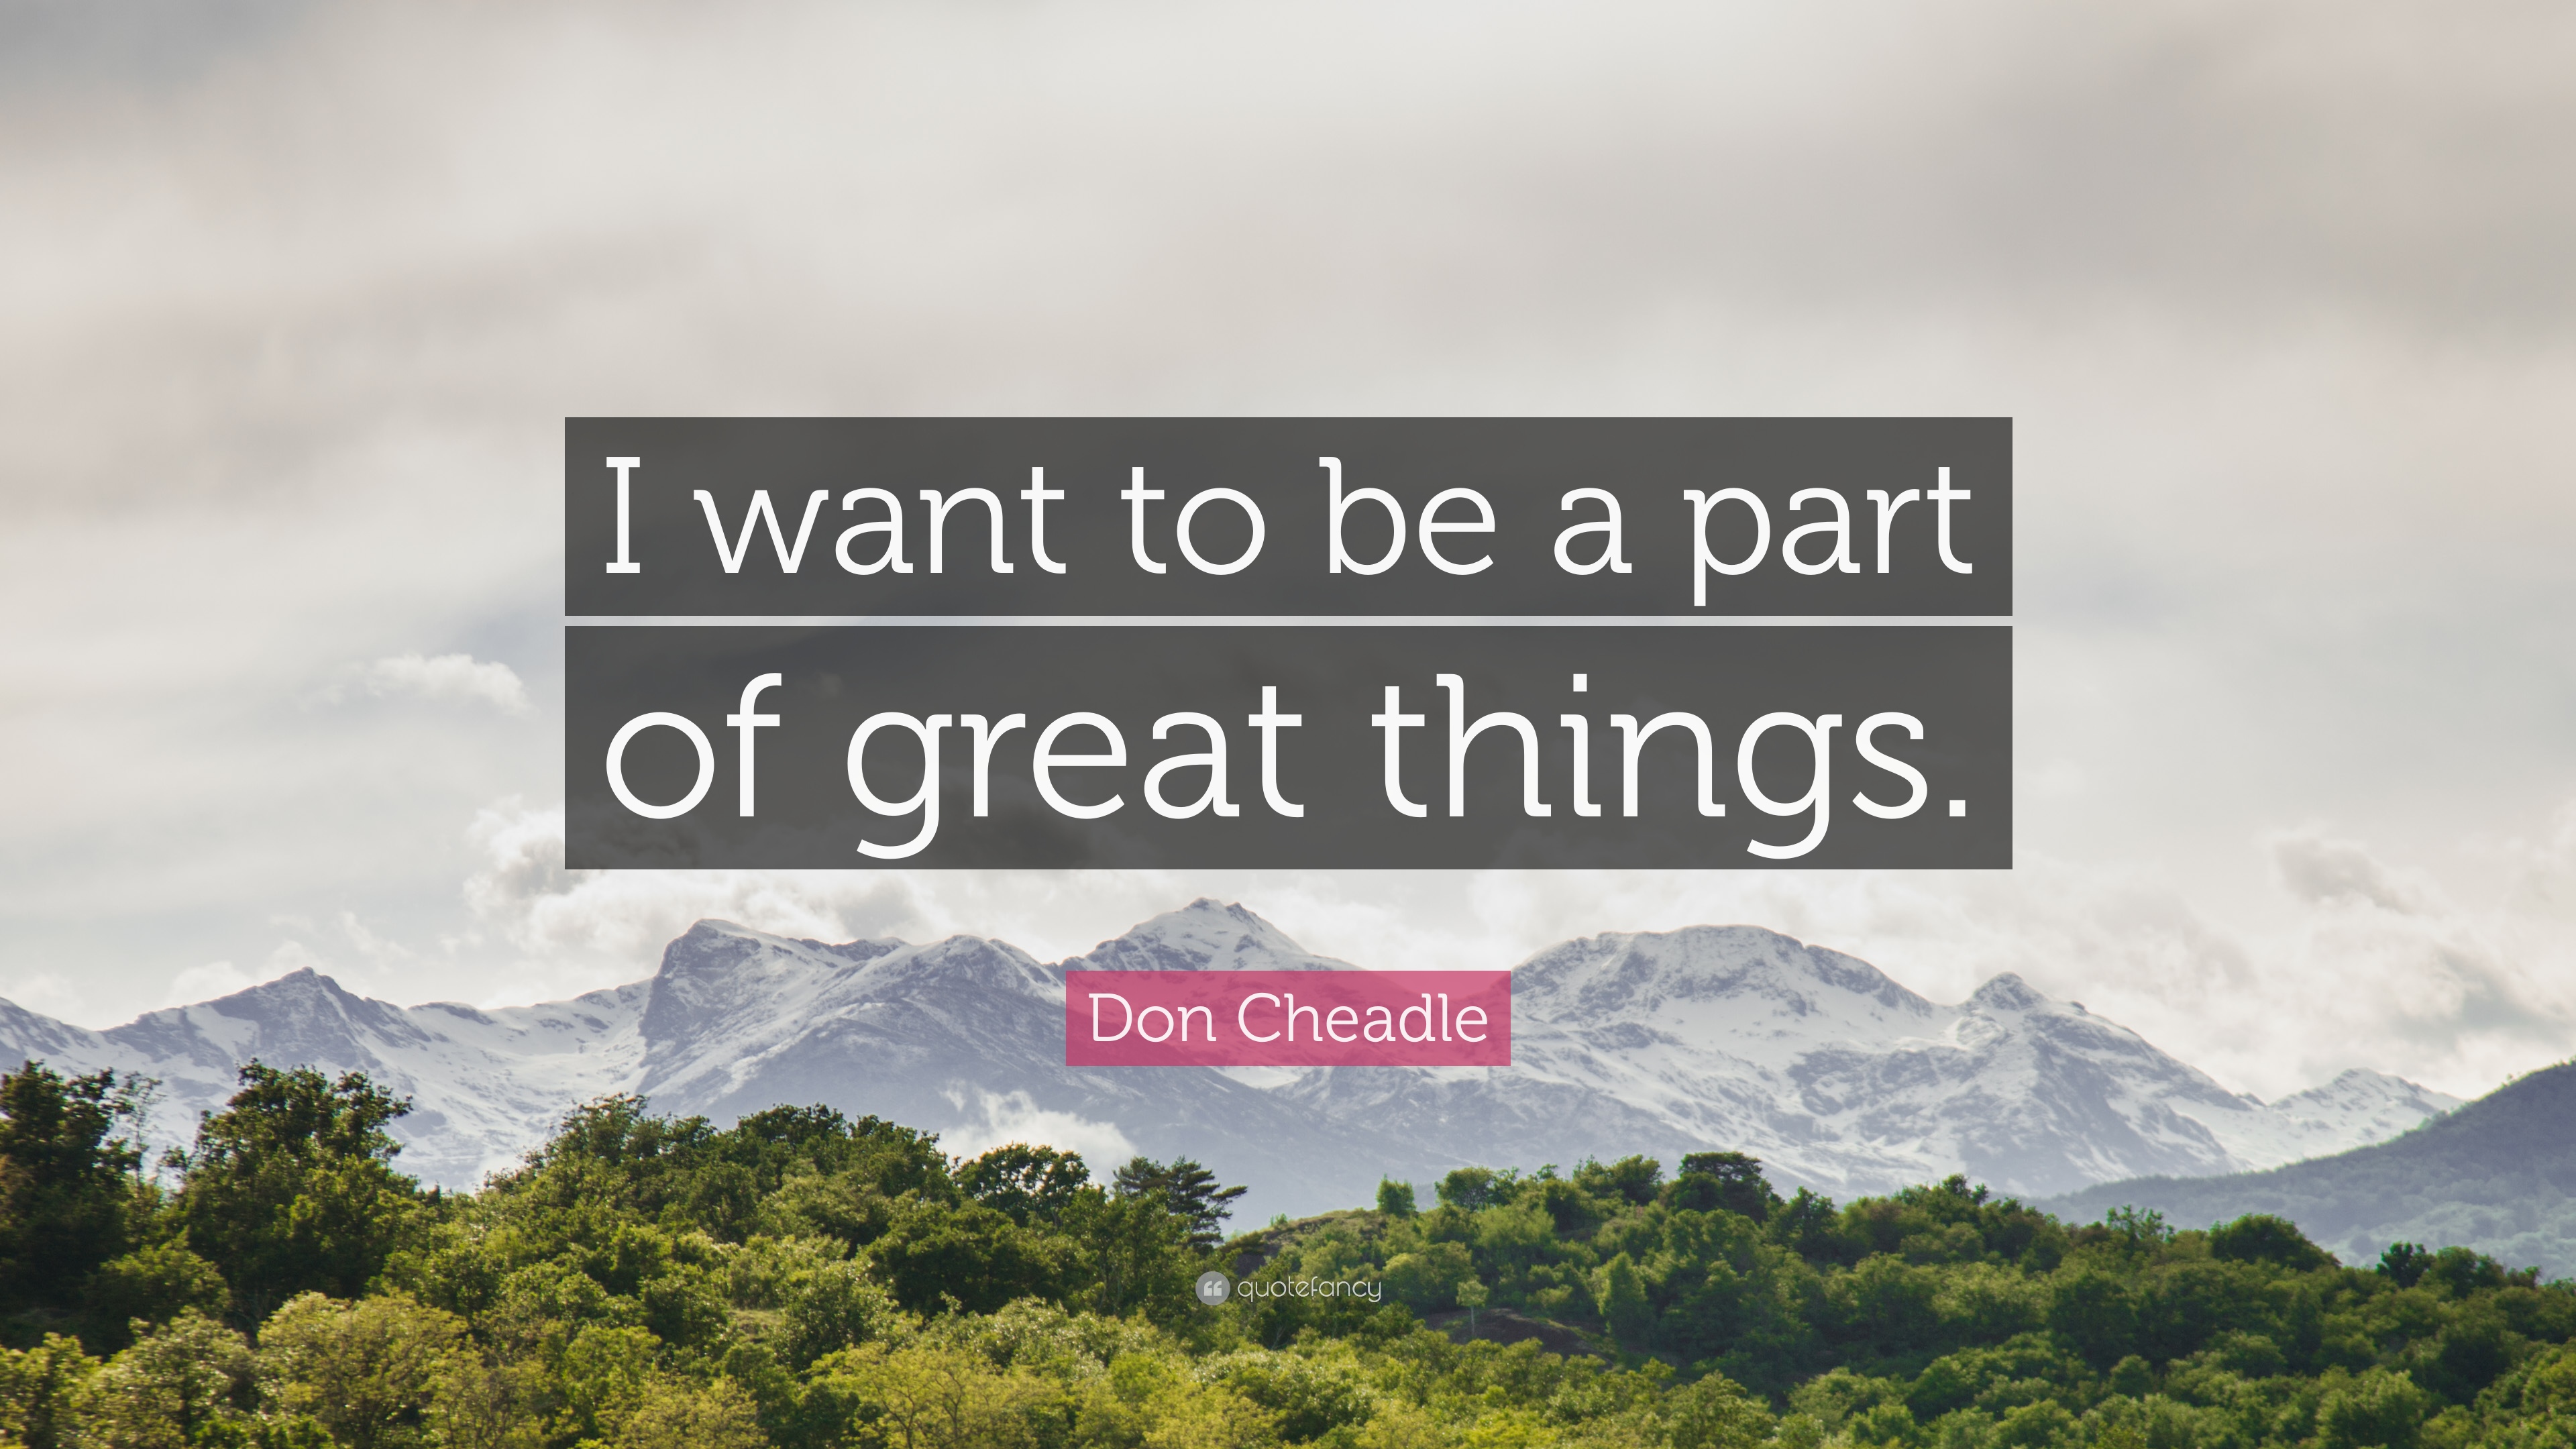 Don Cheadle Quote: “I want to be a part of great things.” 7